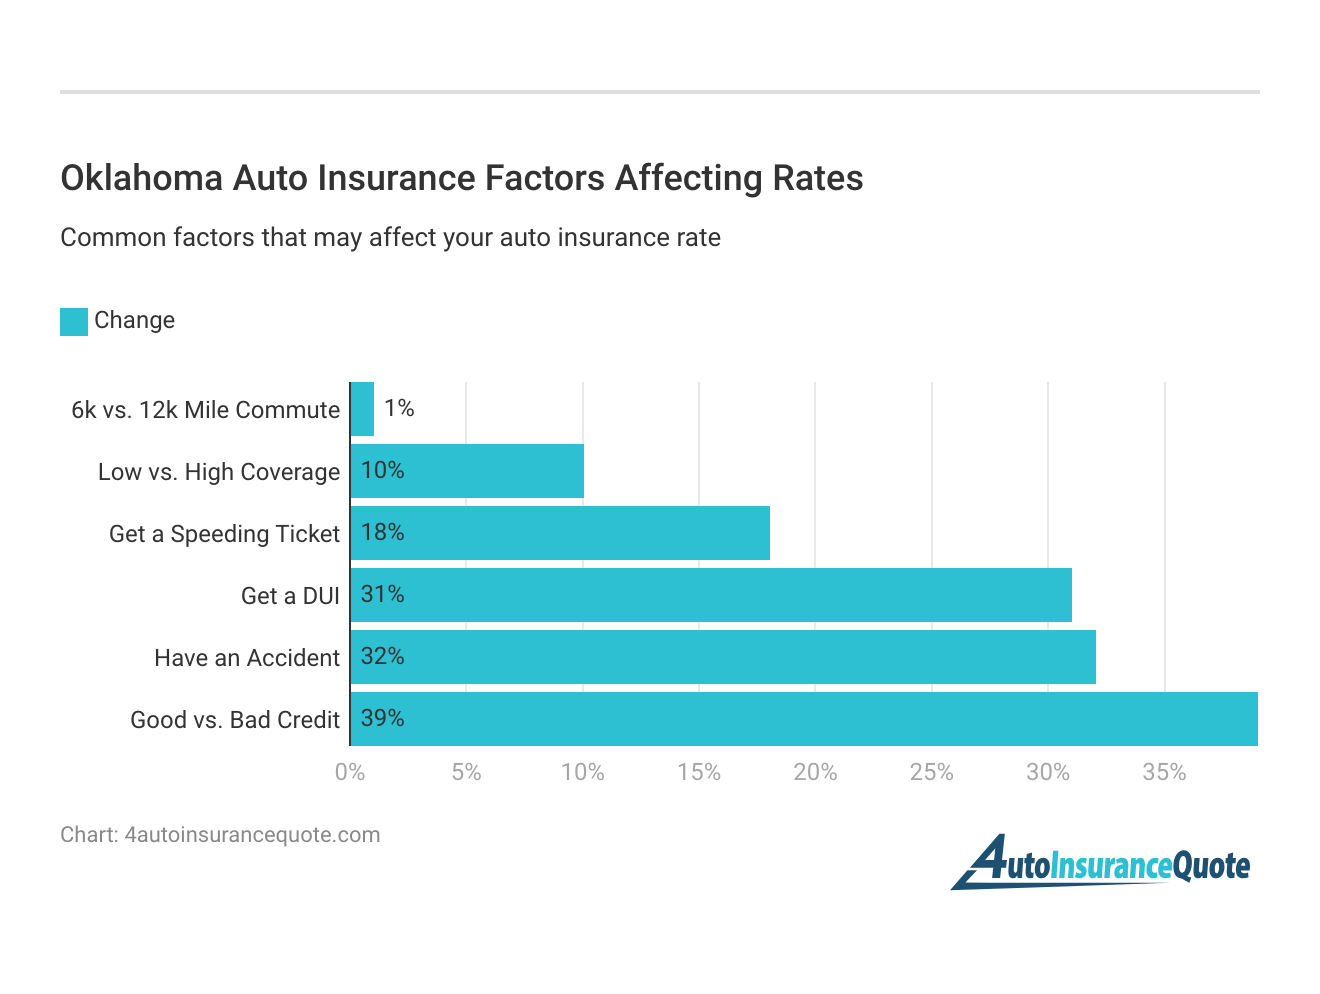 <h3>Oklahoma Auto Insurance Factors Affecting Rates</h3>